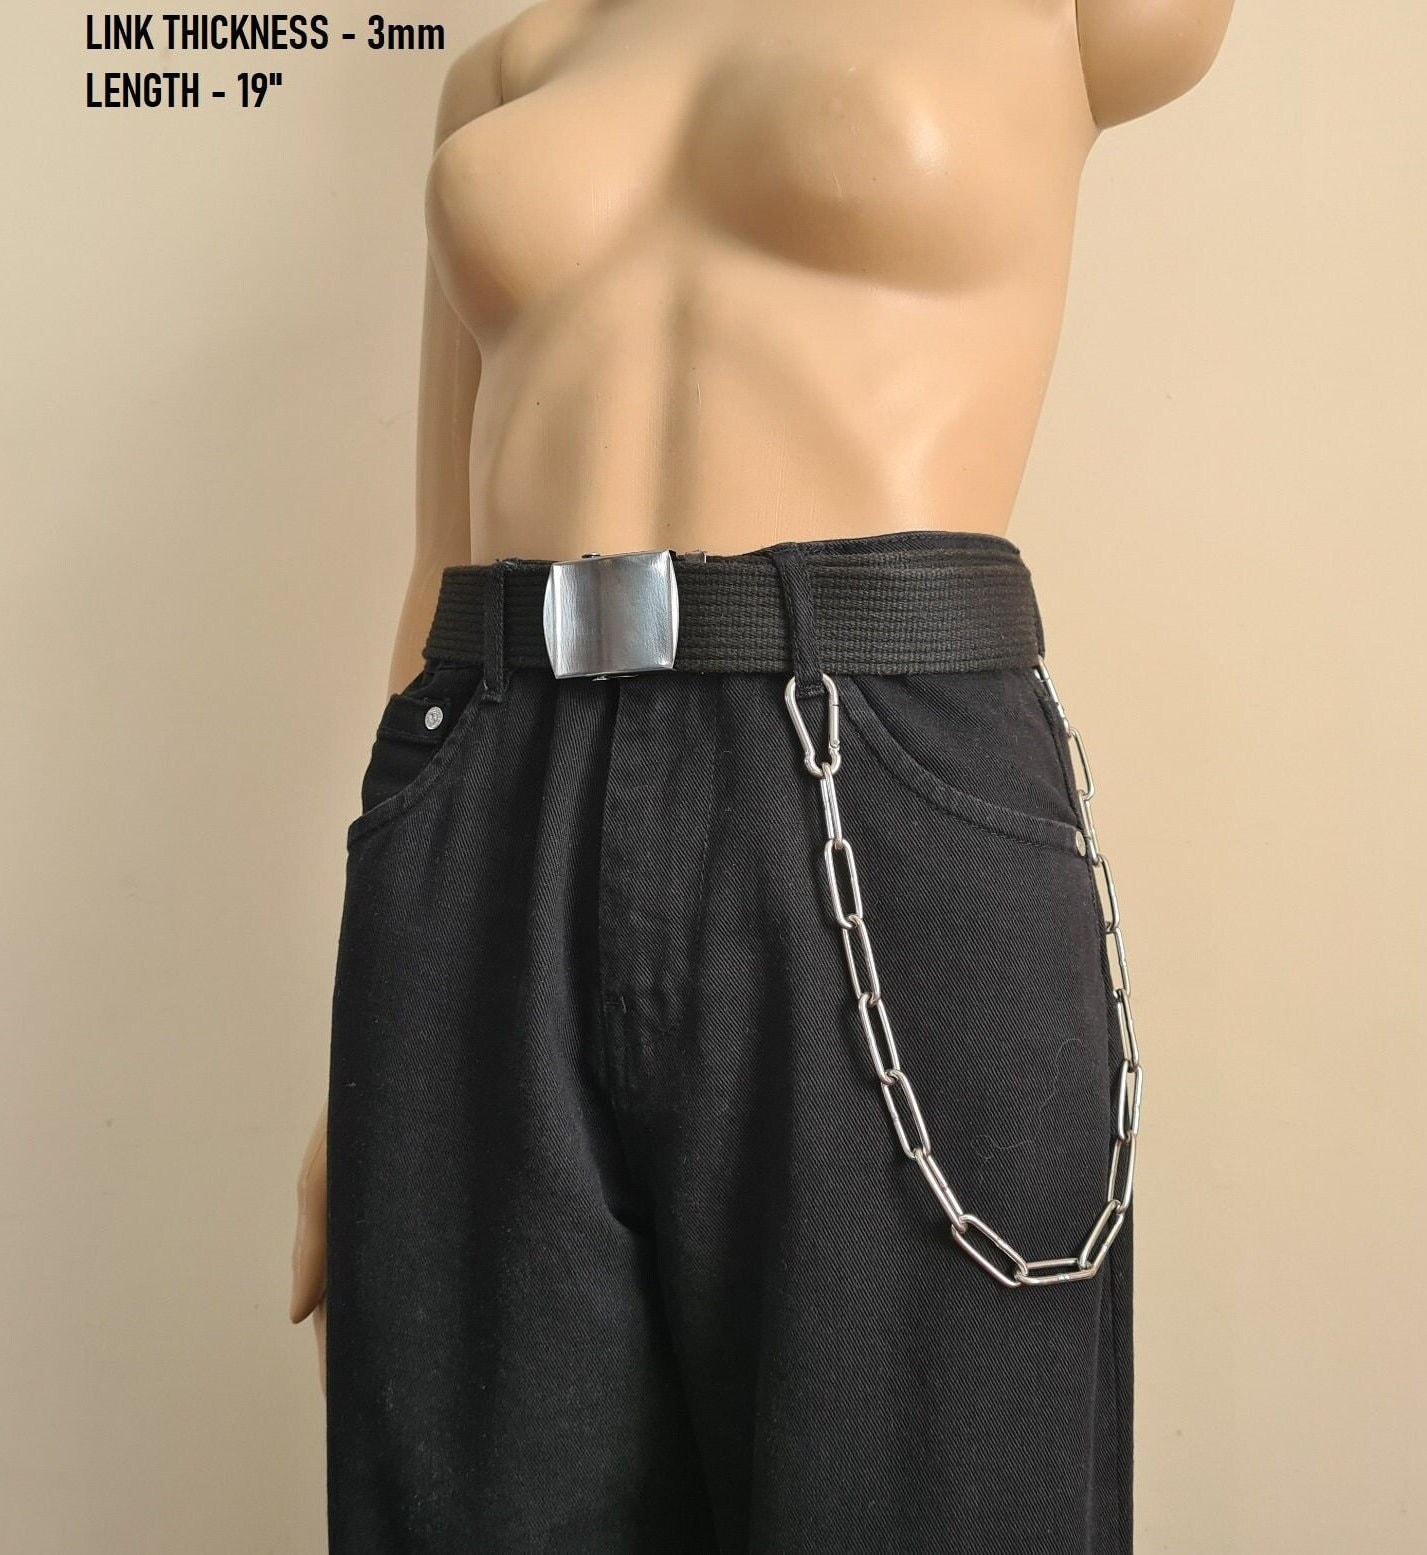 Chunky Hardware Pant Chains Unisex Heavy Duty Industrial Stainless